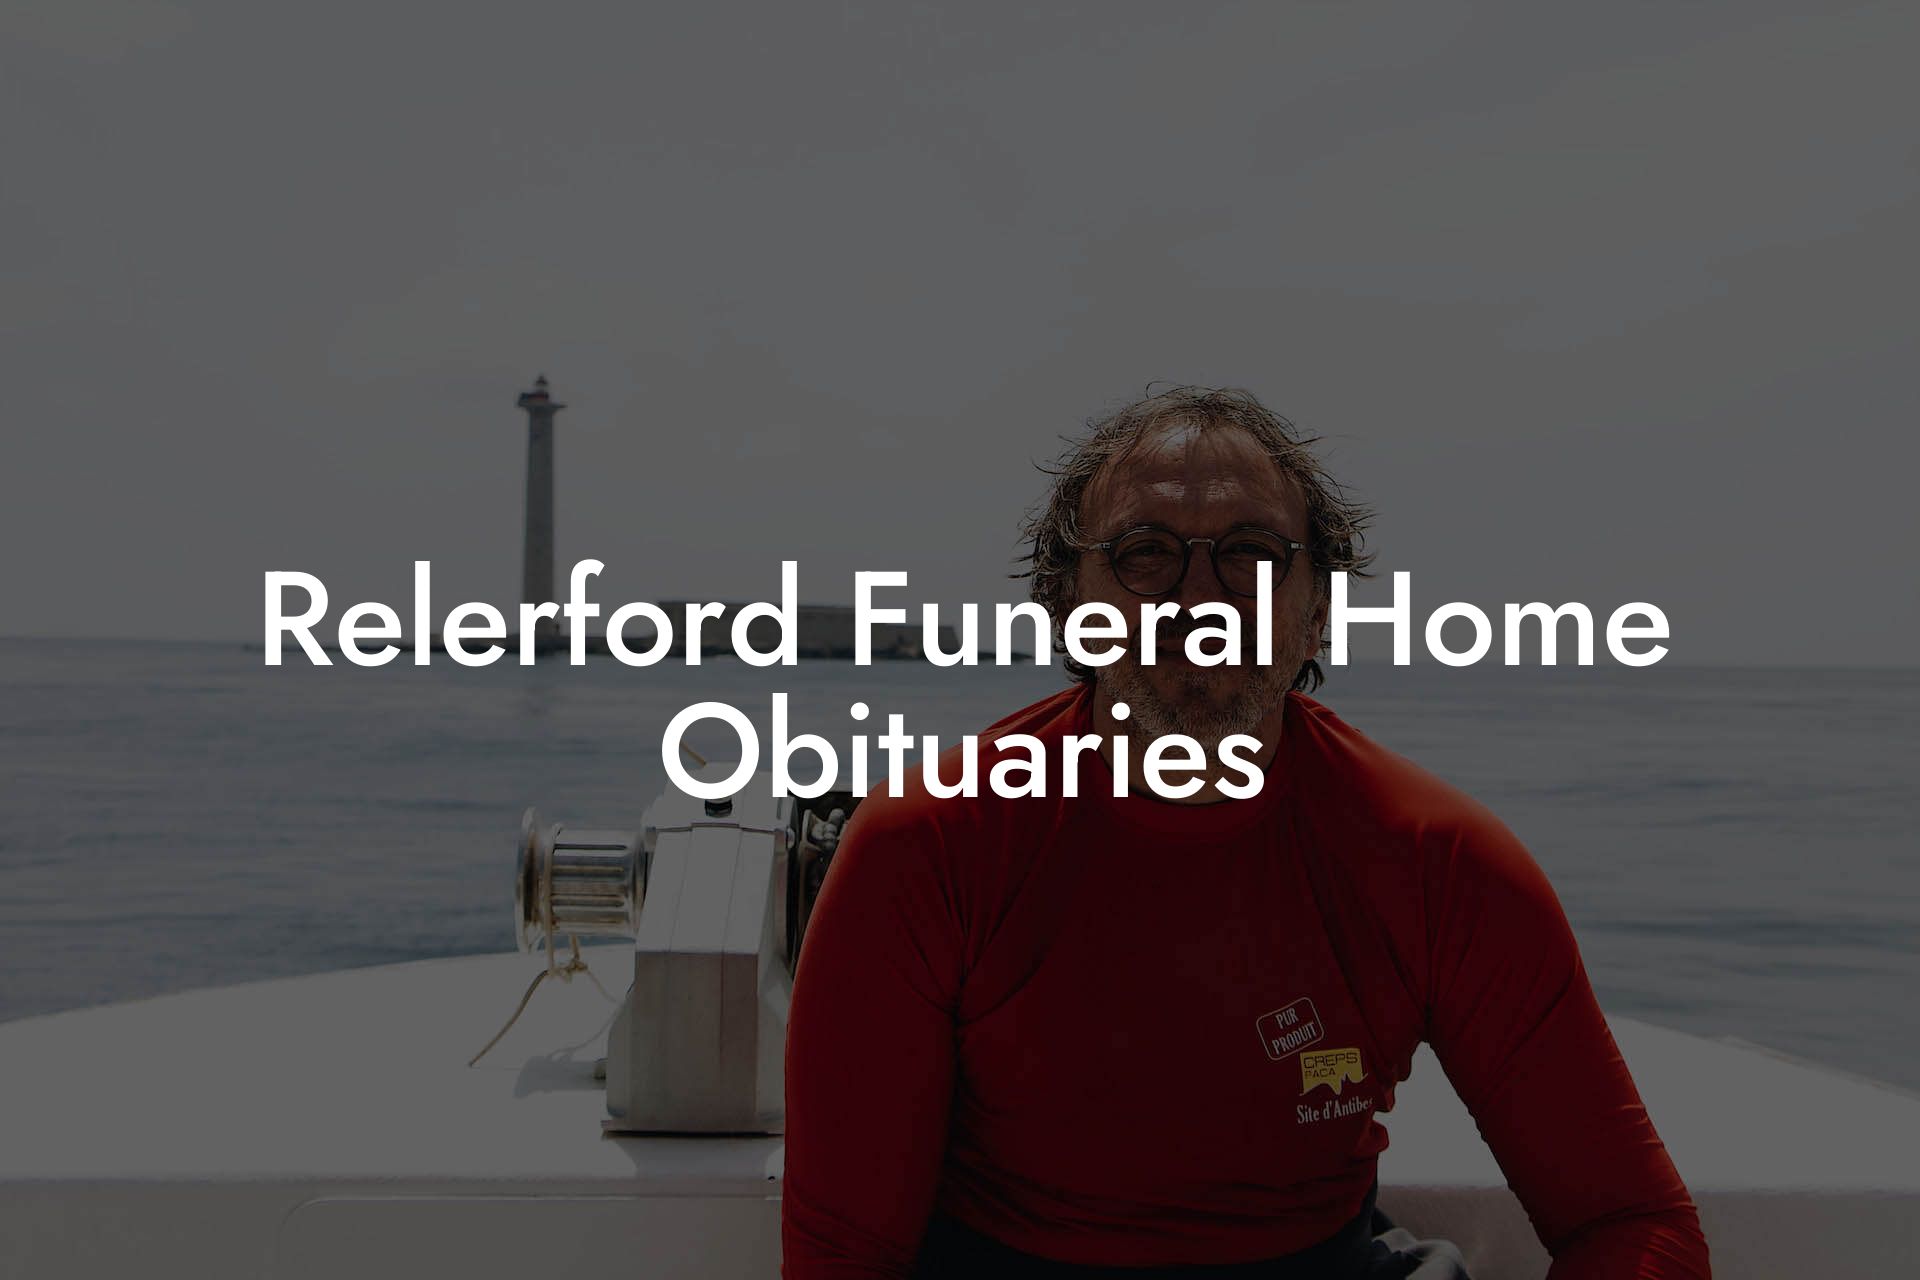 Relerford Funeral Home Obituaries